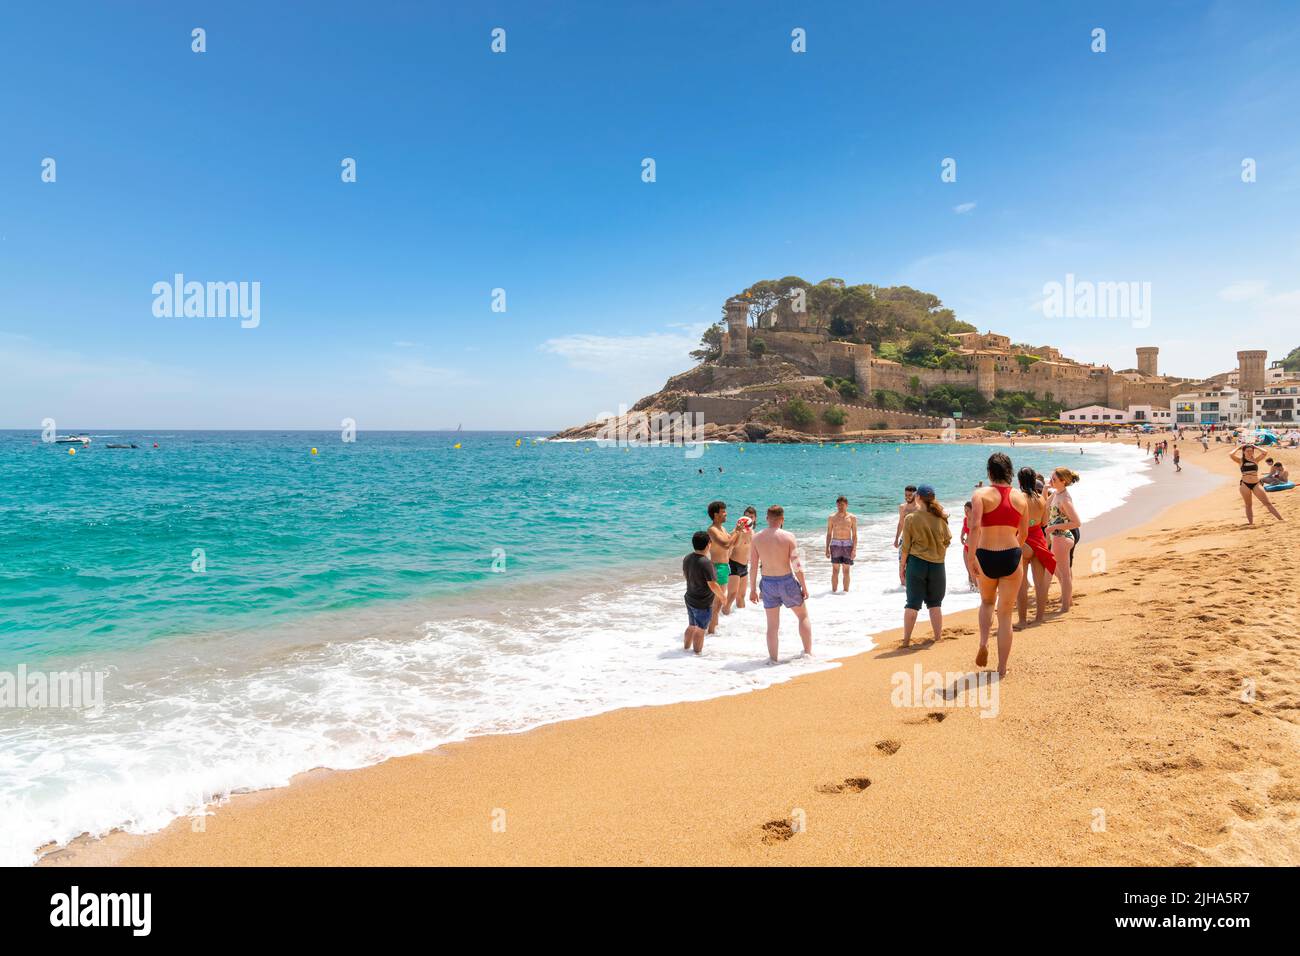 Young adults play ball on the sandy Platja Gran beach at the resort town of Tossa de Mar, Spain, on the Costa Brava coast of the Mediterranean Sea. Stock Photo